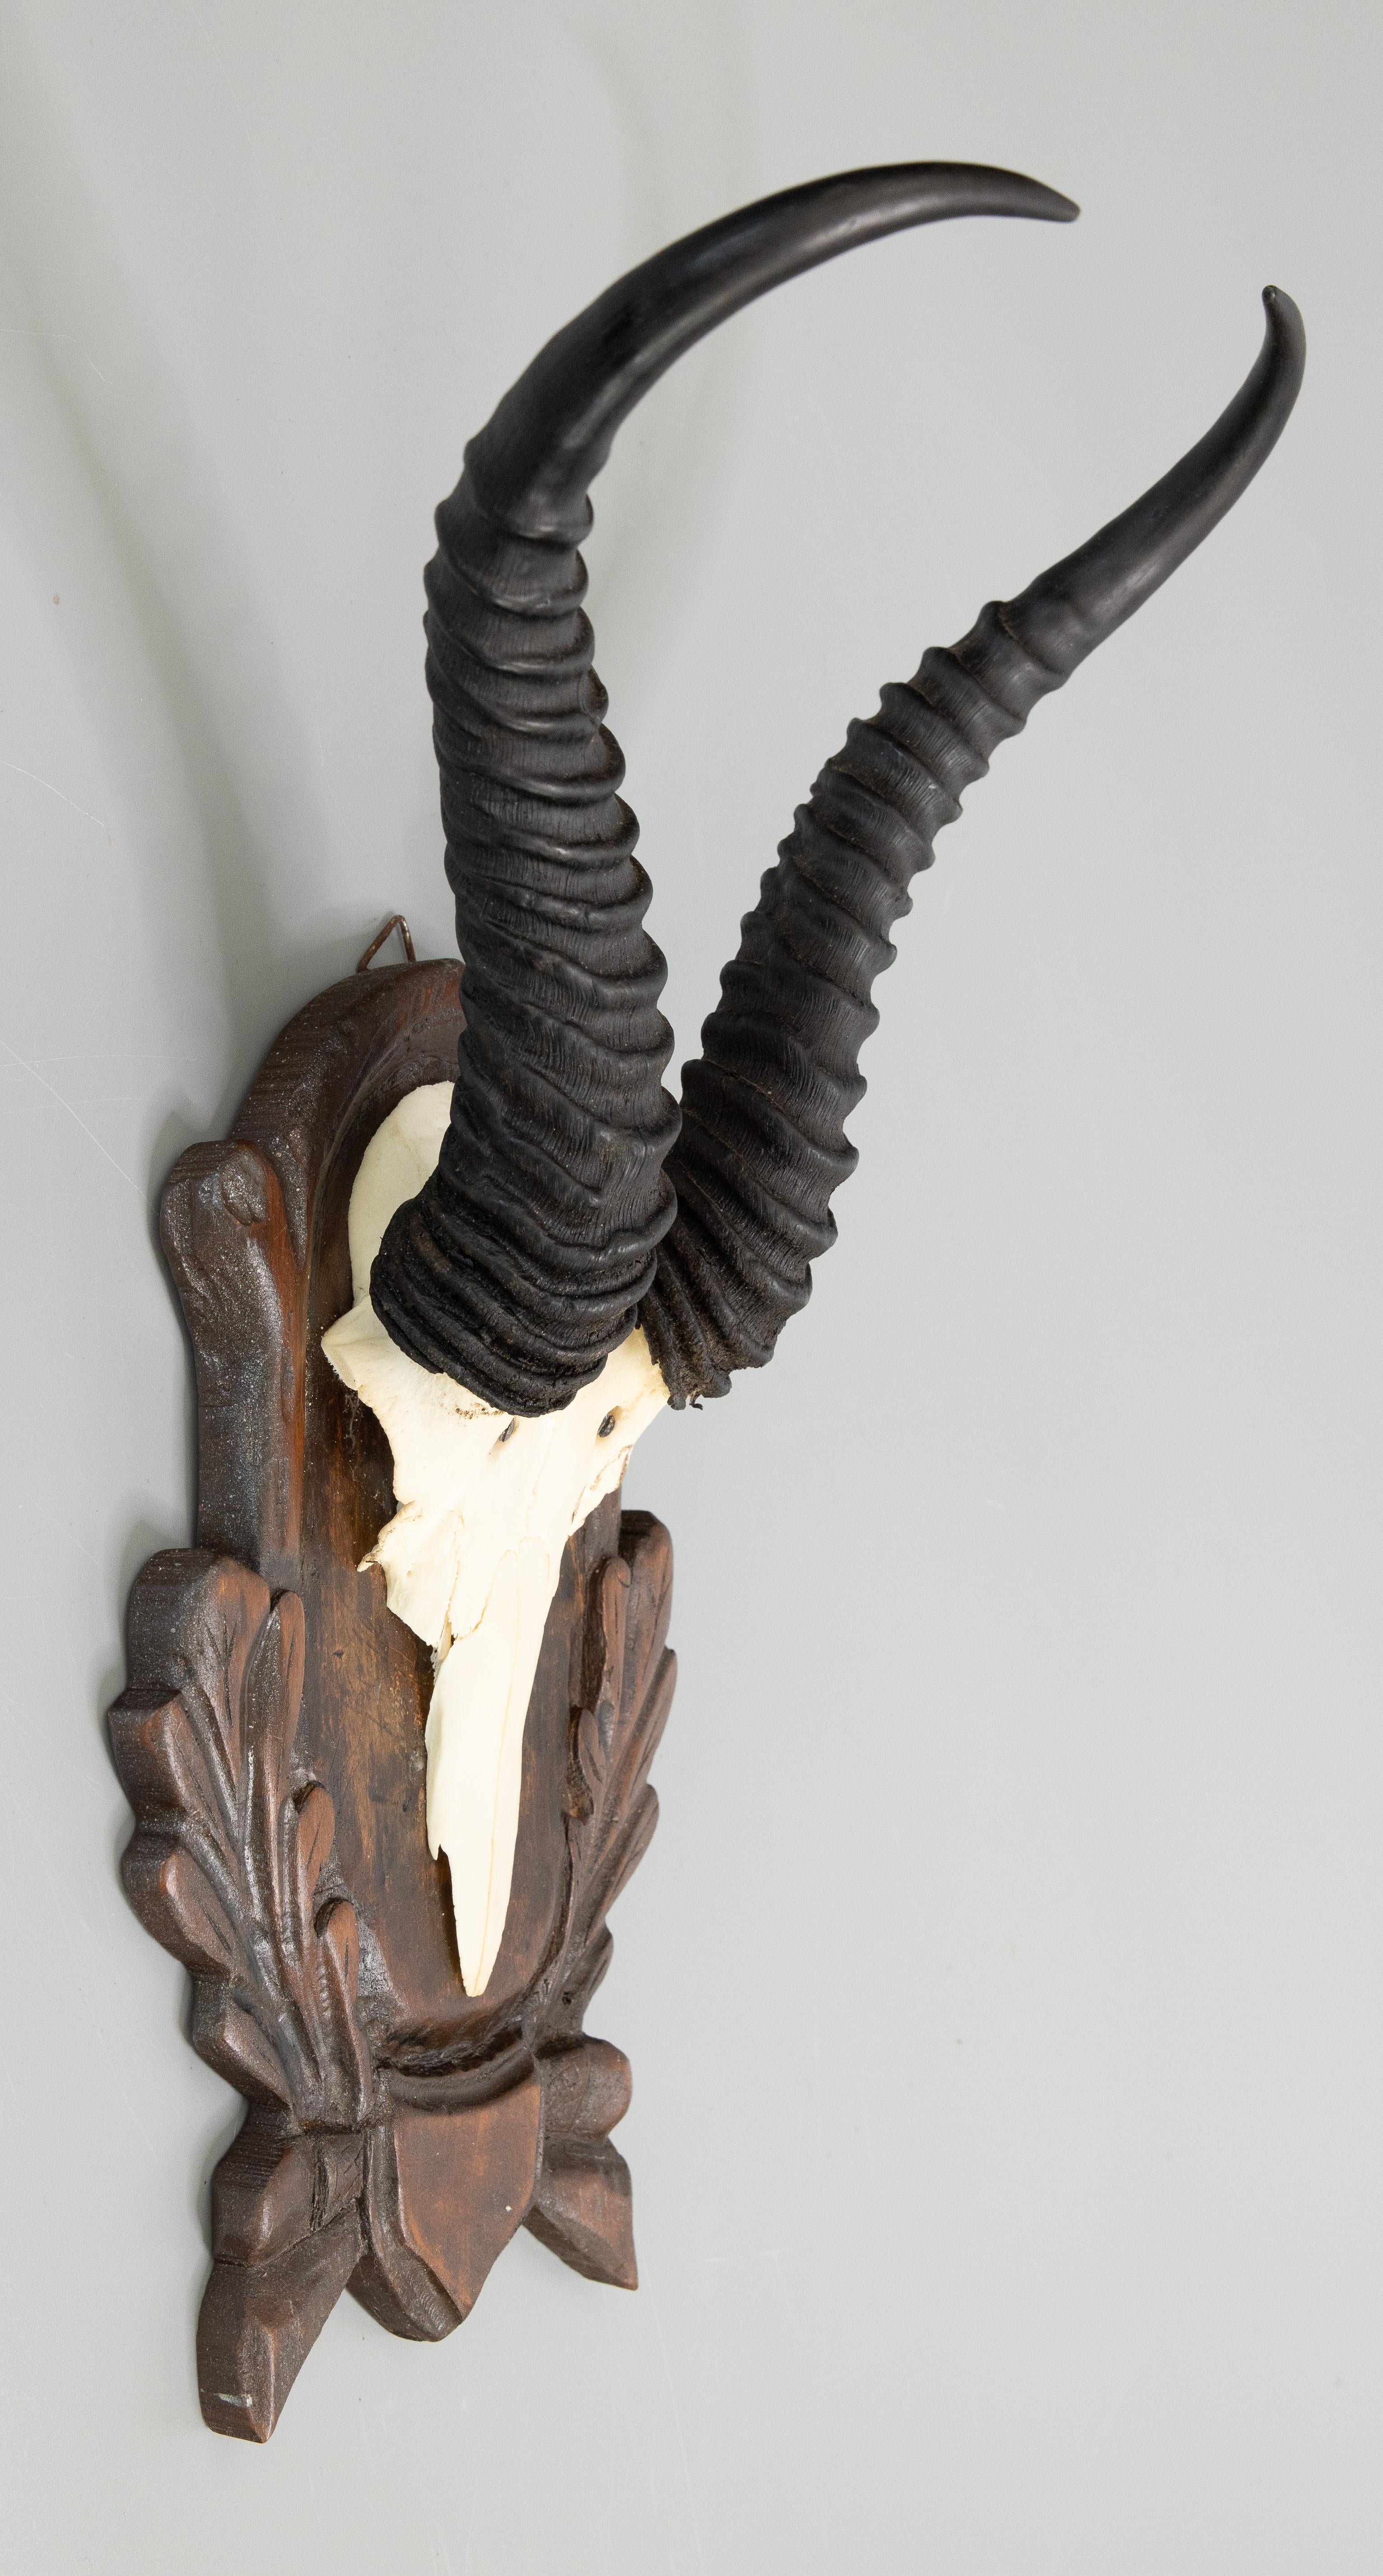 A fine antique early 20th century antelope or gazelle antler horns hunting trophy on a hand carved Black Forest plaque. The plaque is hand carved with oak leaves, acorns, and branches and the horns are a nice large Size. It's perfect for a study and